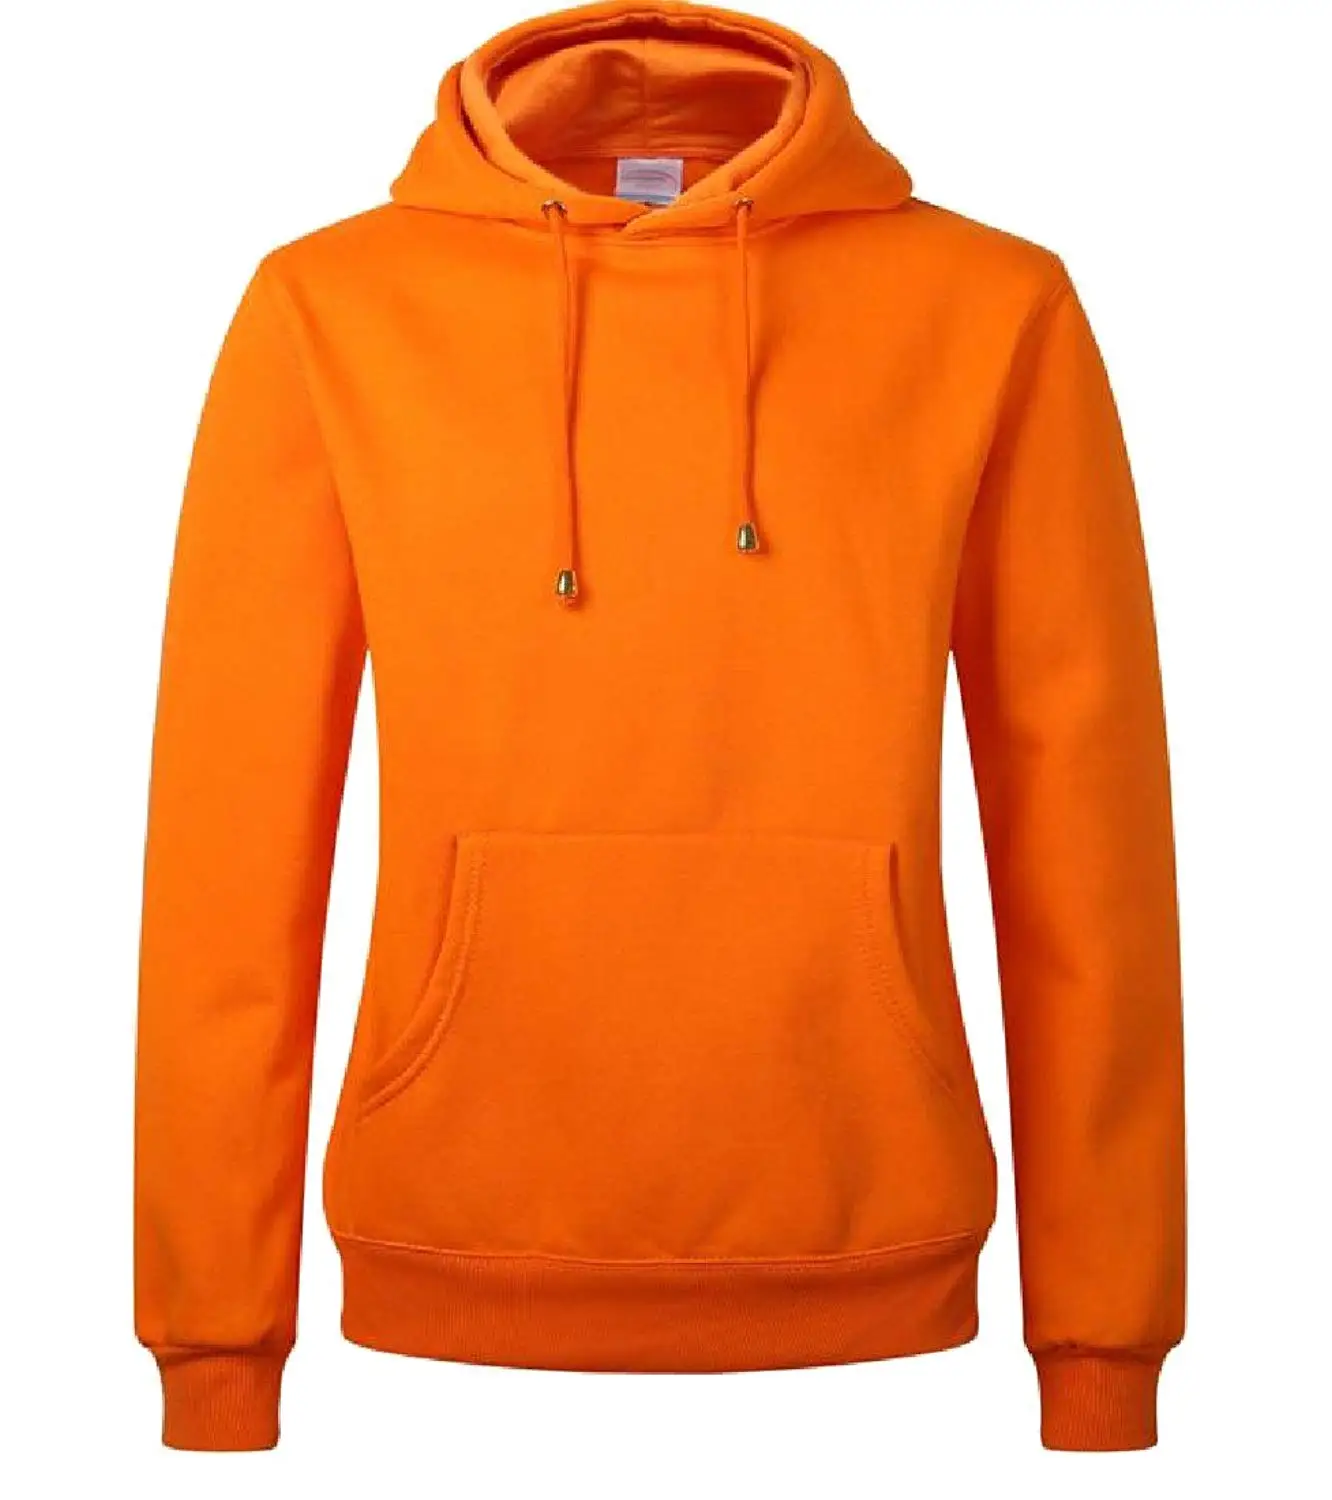 Cheap Colourful Hoodie, find Colourful Hoodie deals on line at Alibaba.com